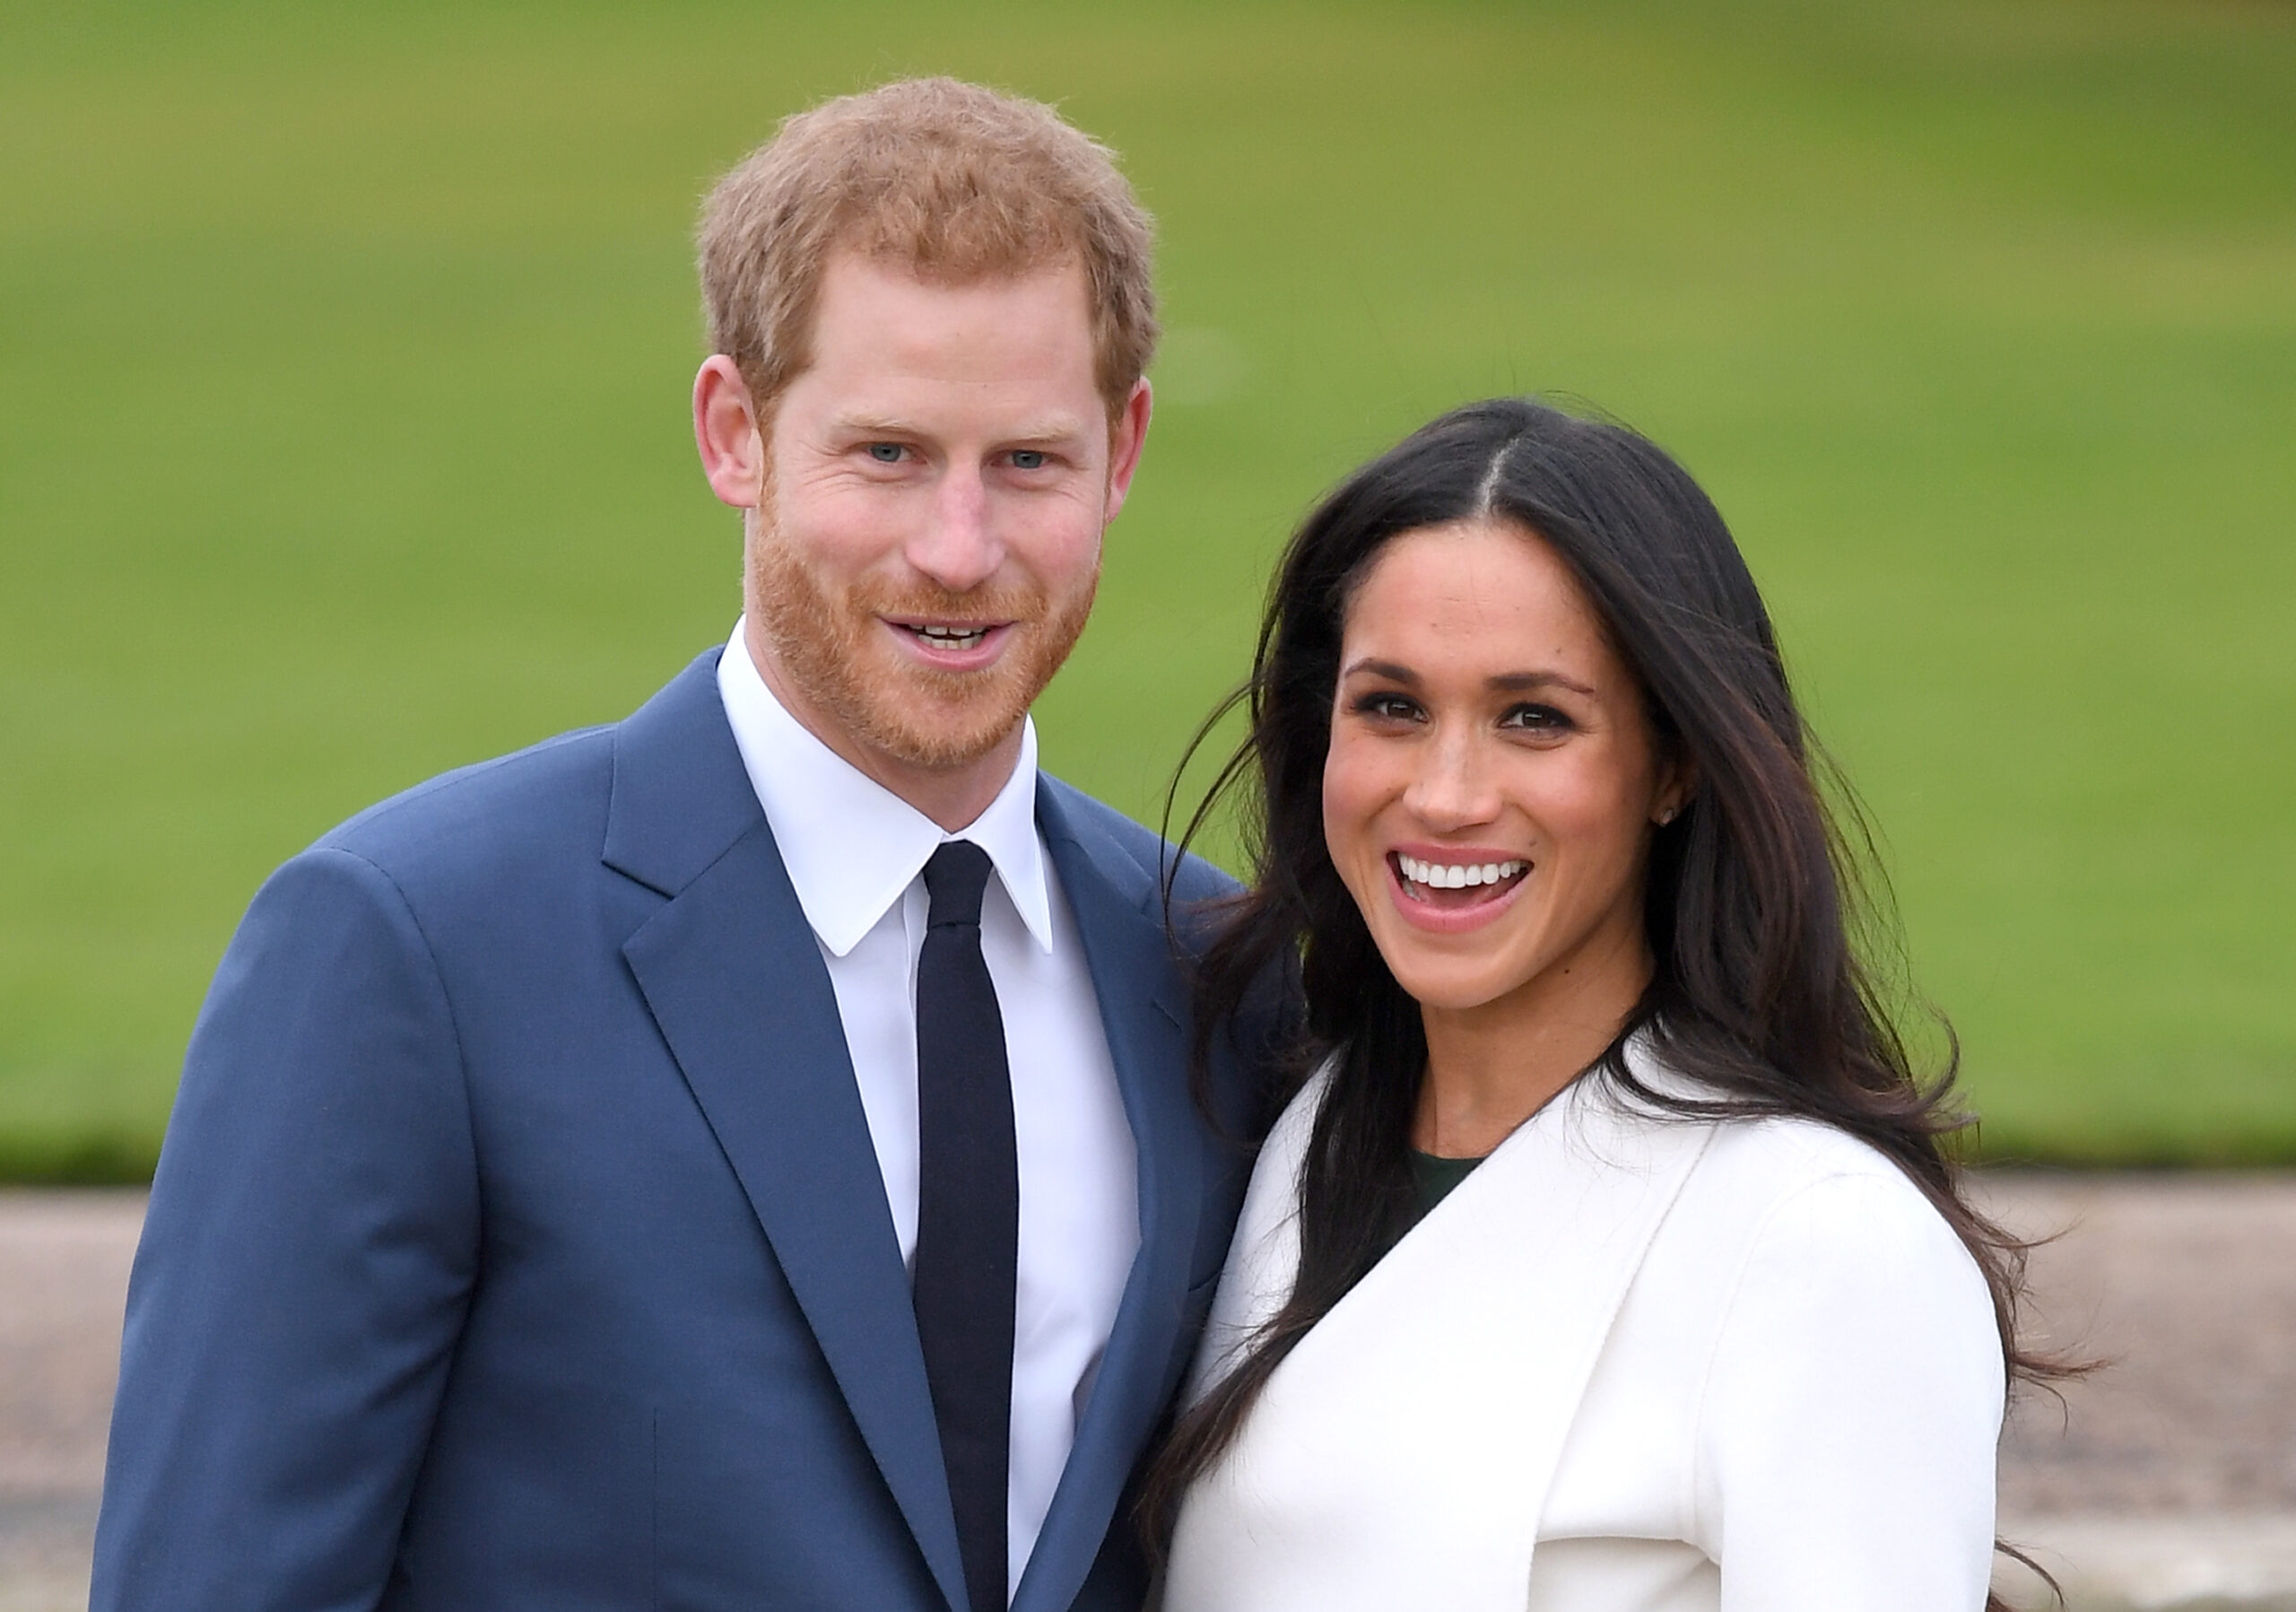 Meghan Markle’s finances are going to get very confusing after the royal wedding